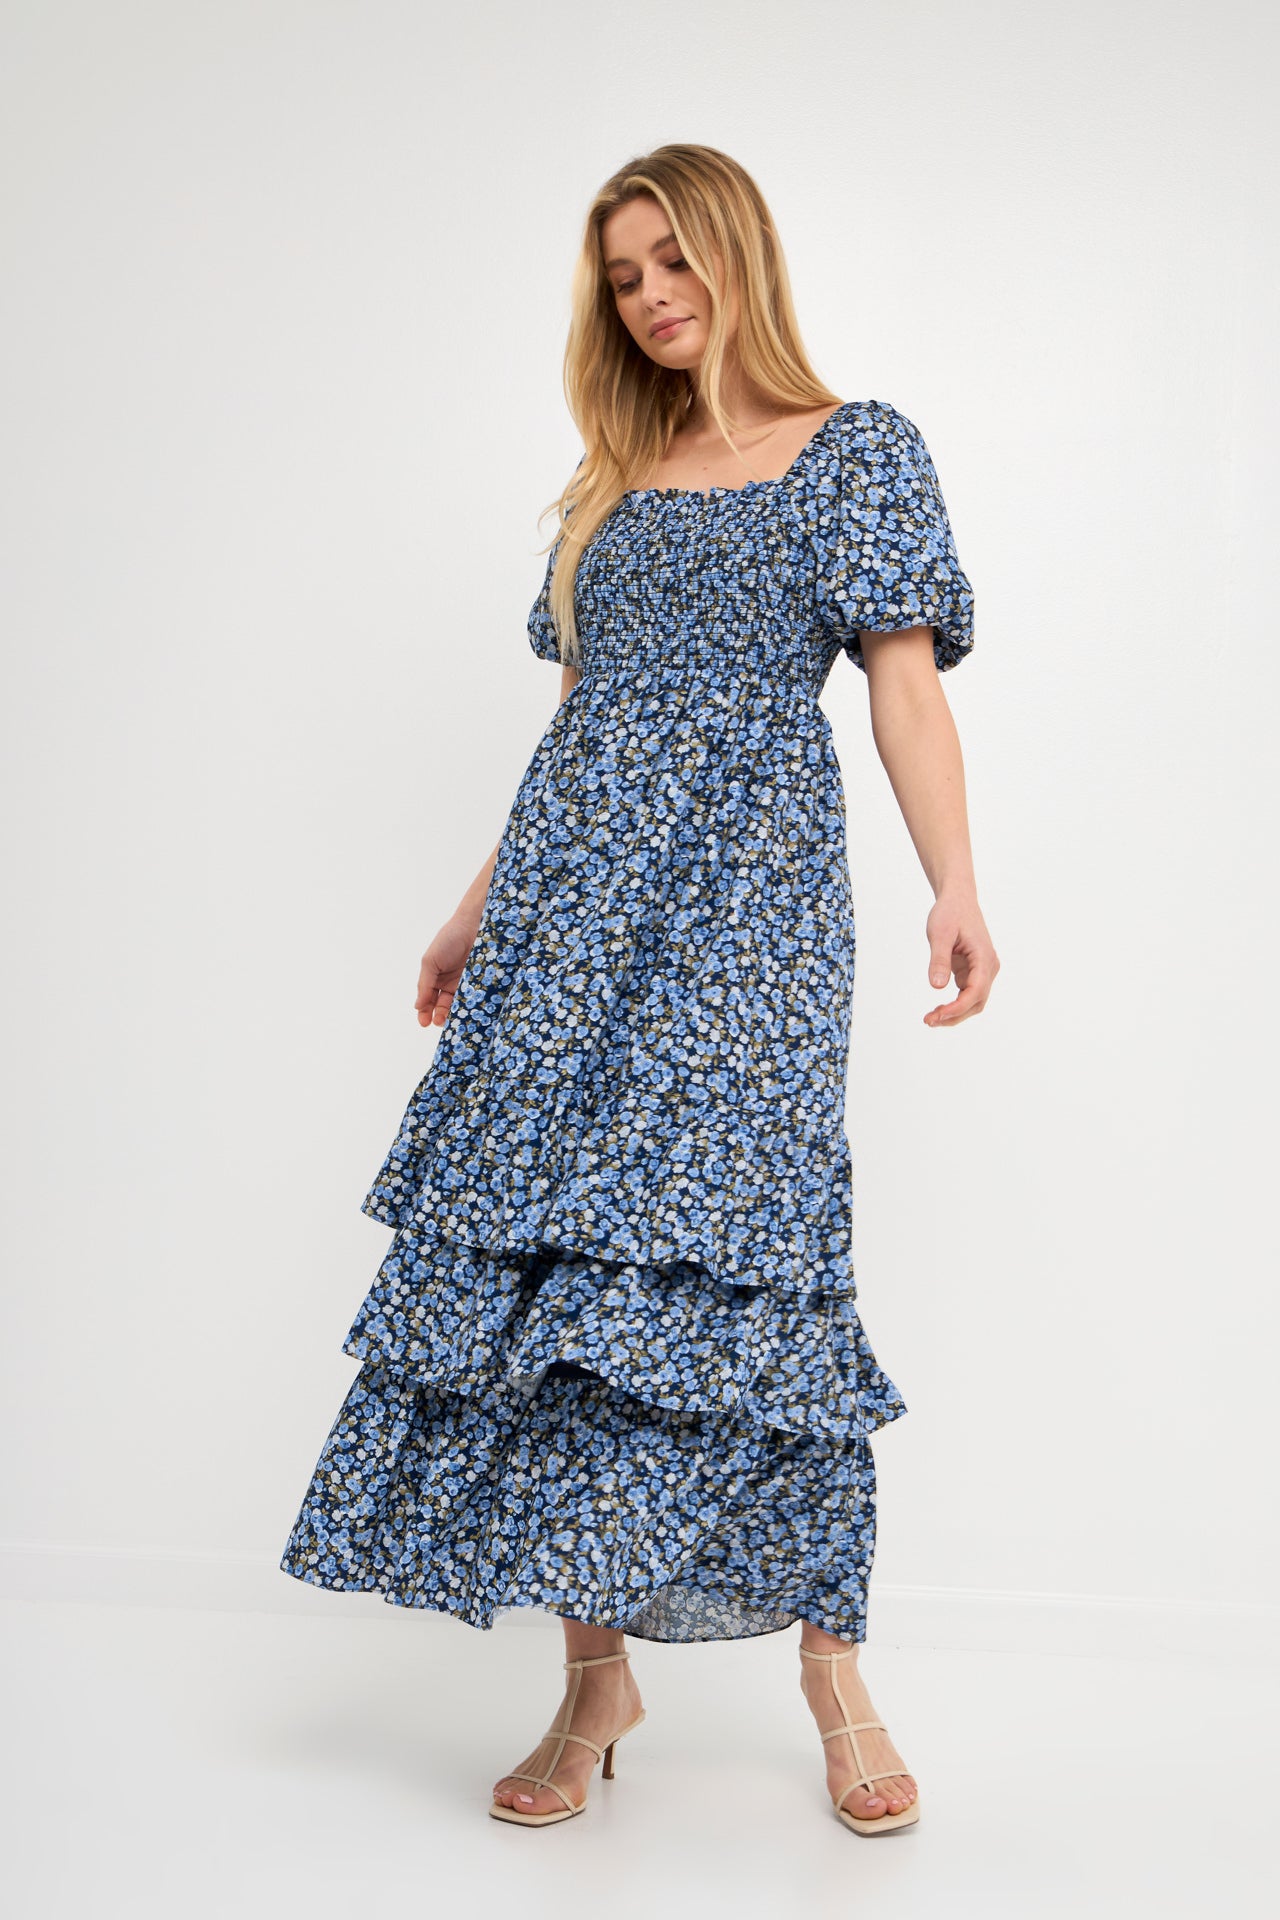 ENGLISH FACTORY - Textured Floral Printed Maxi Dress - DRESSES available at Objectrare